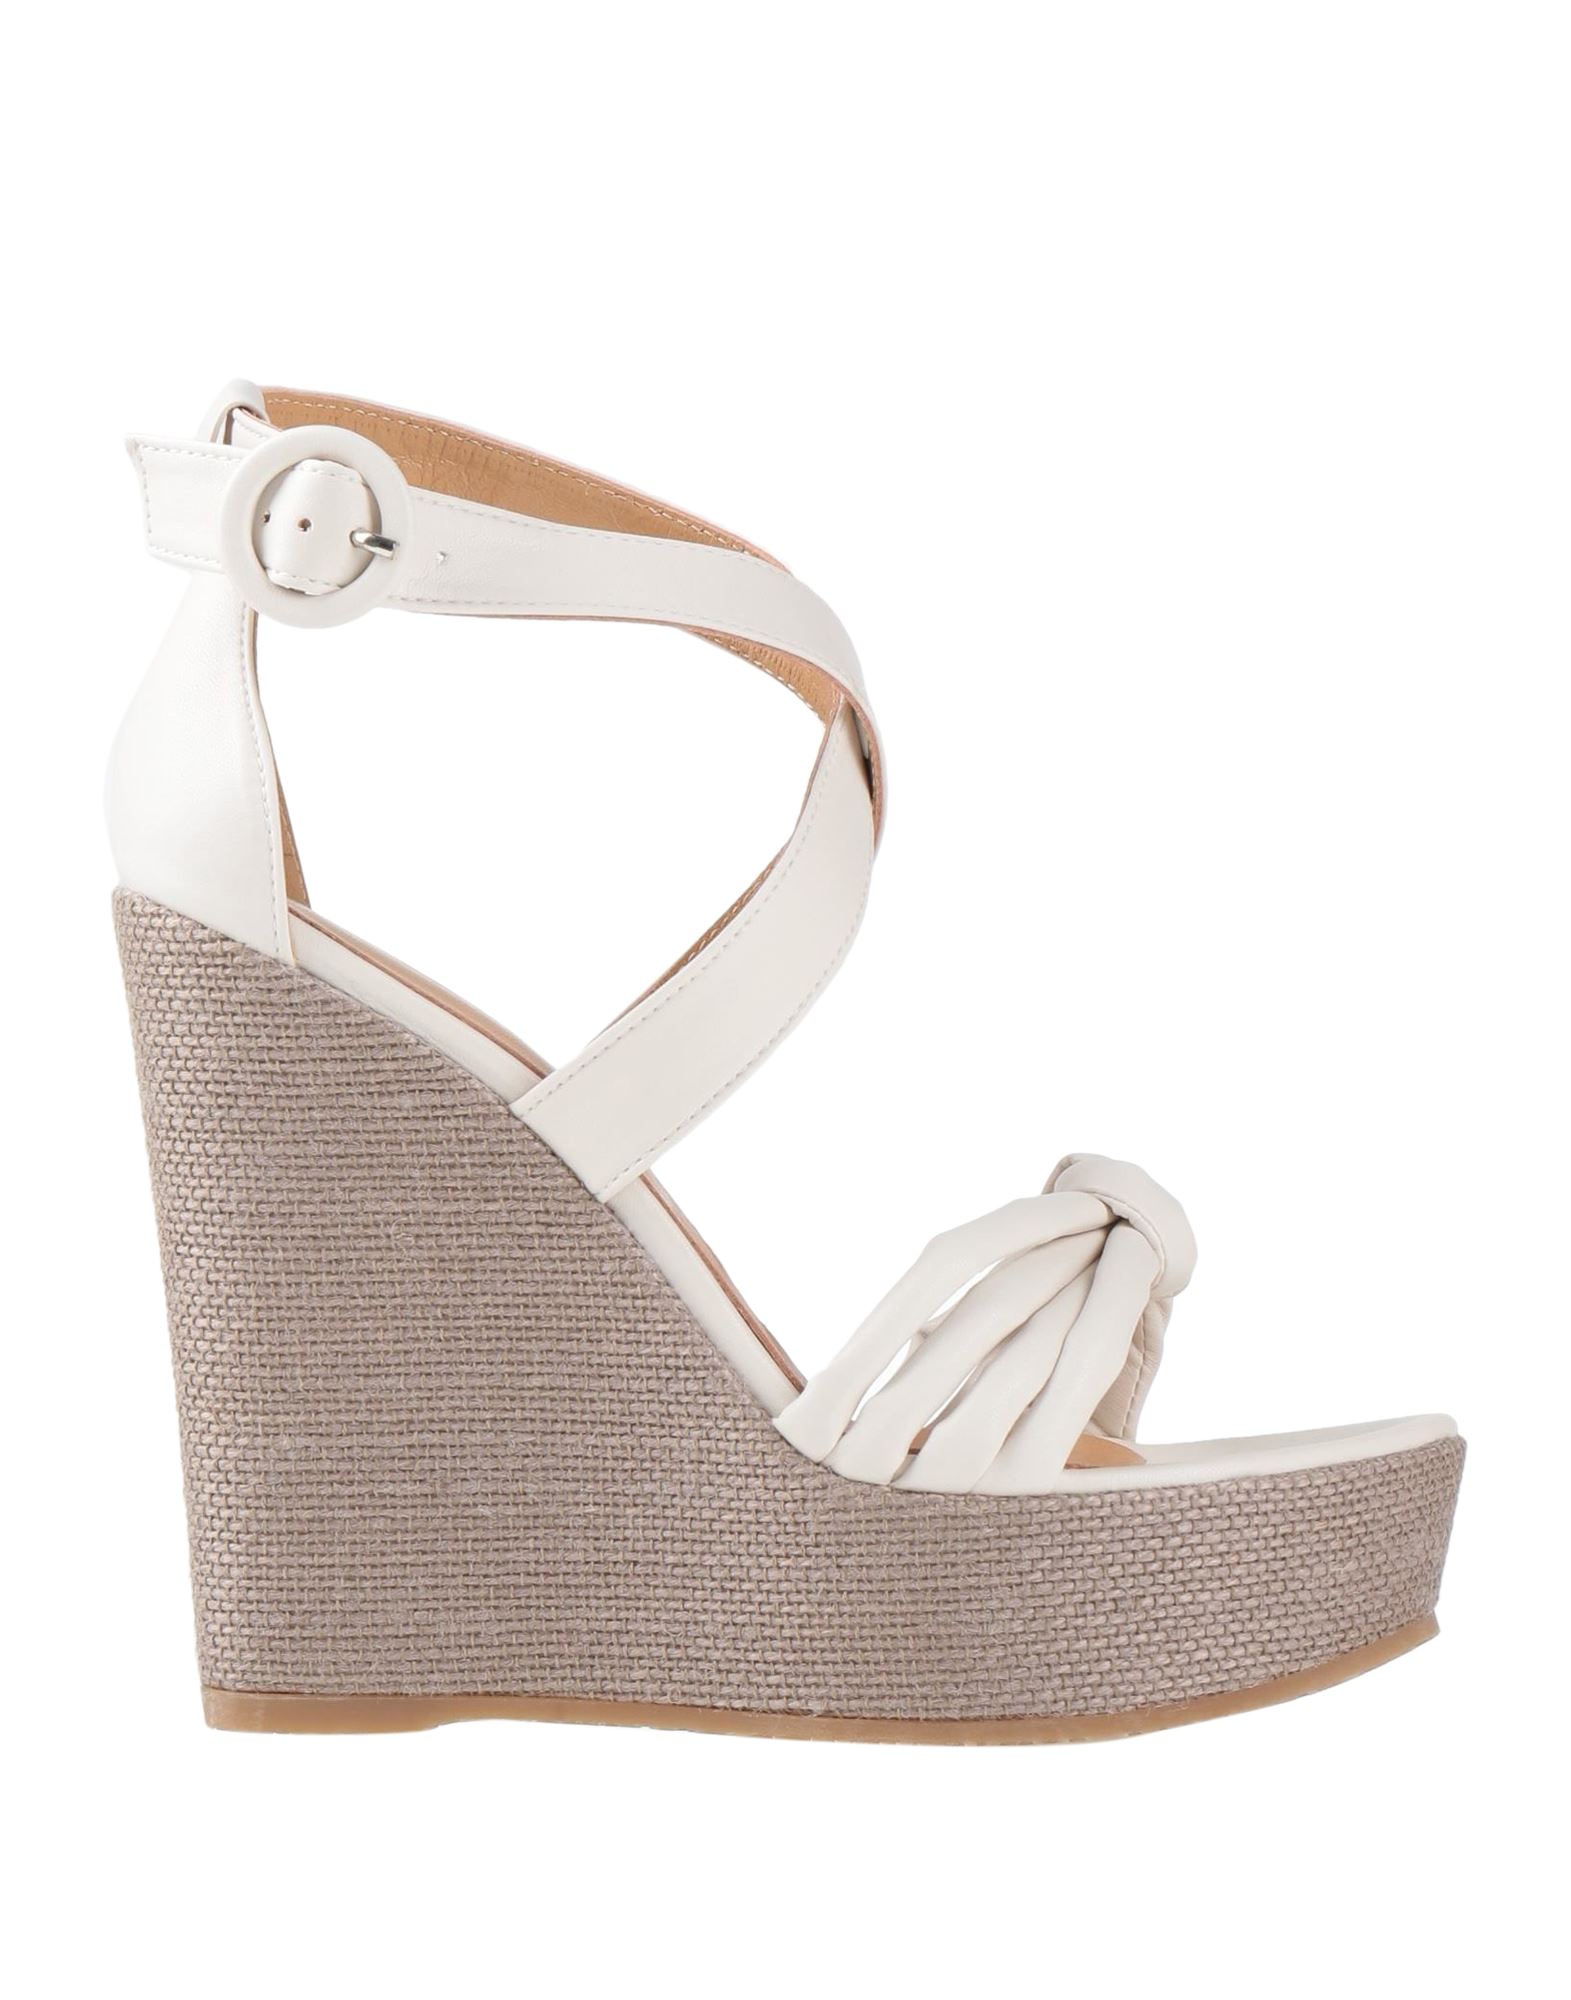 Paolo Mattei Sandals In White | ModeSens